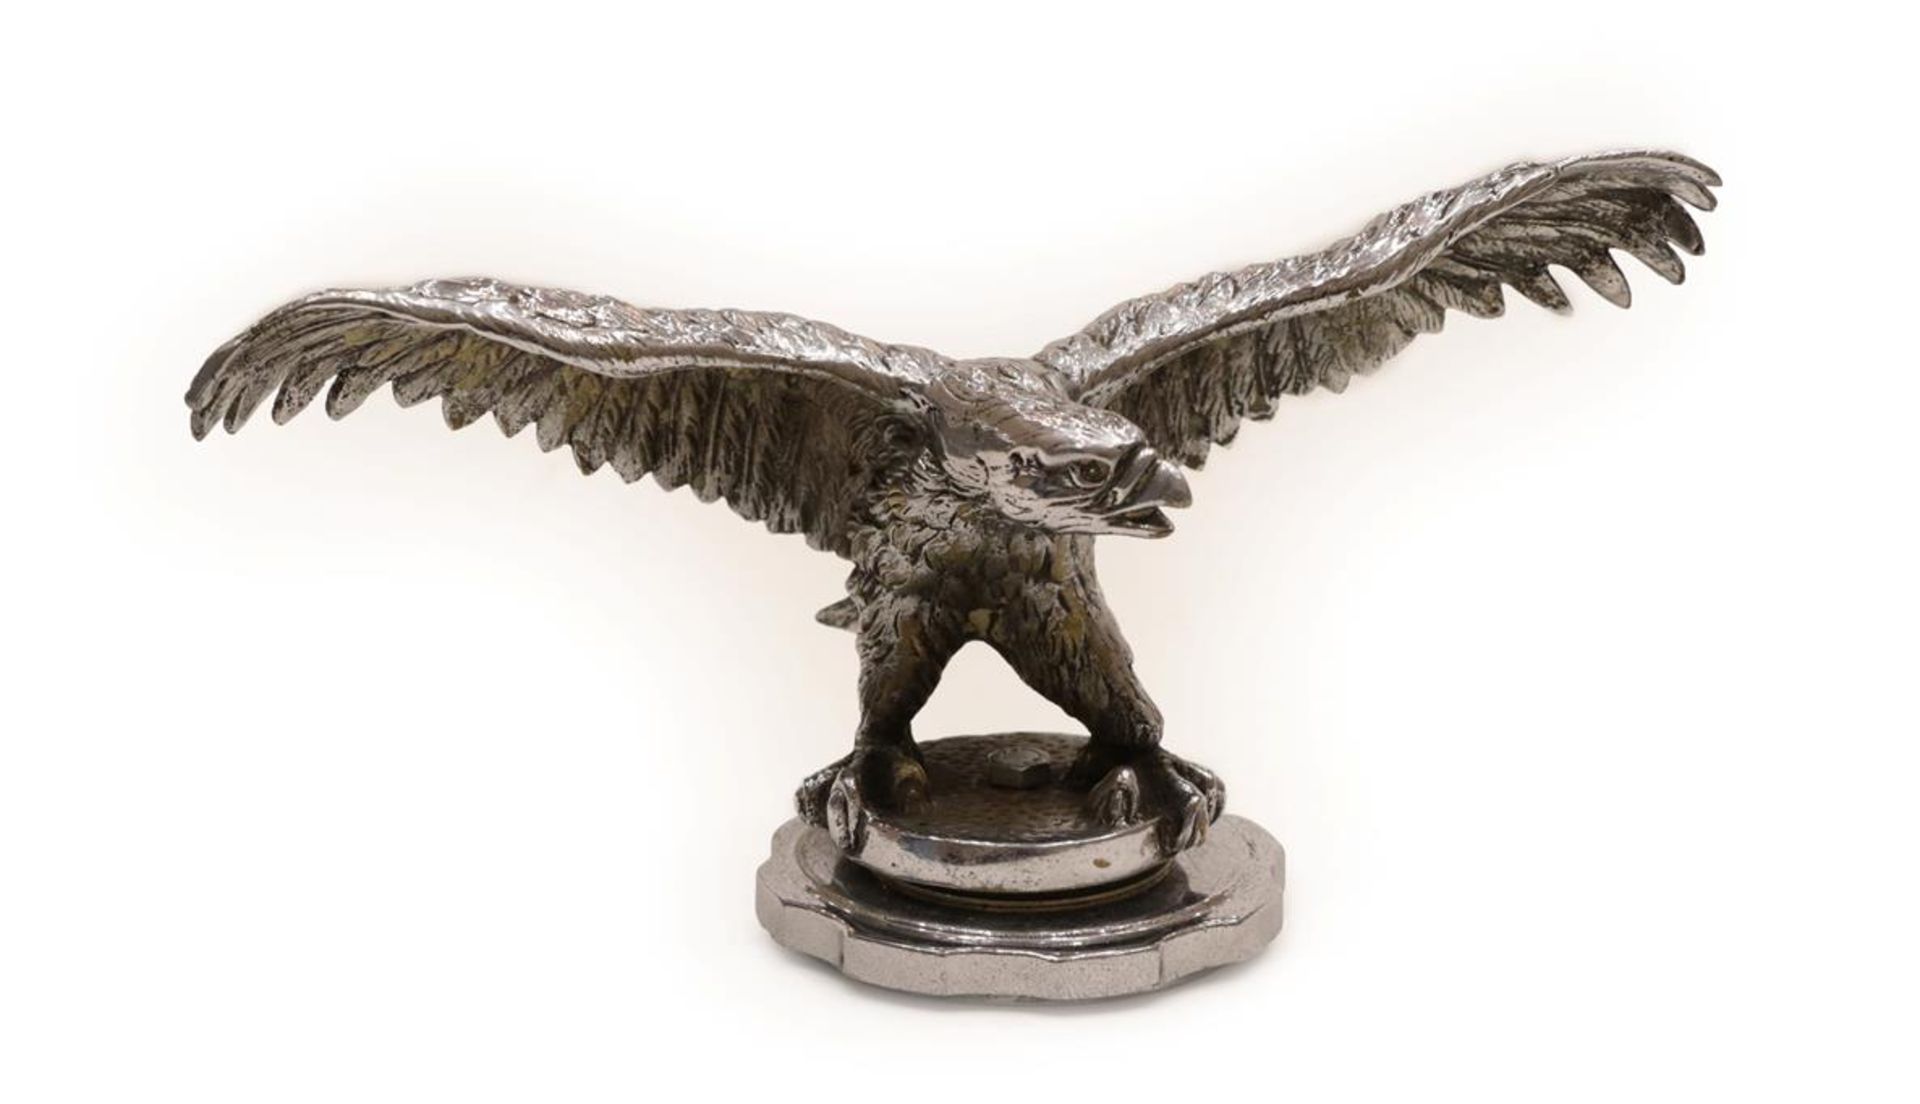 A 1930's Nickel on Brass Car Mascot as an Eagle, with wings outstretched standing on a circular